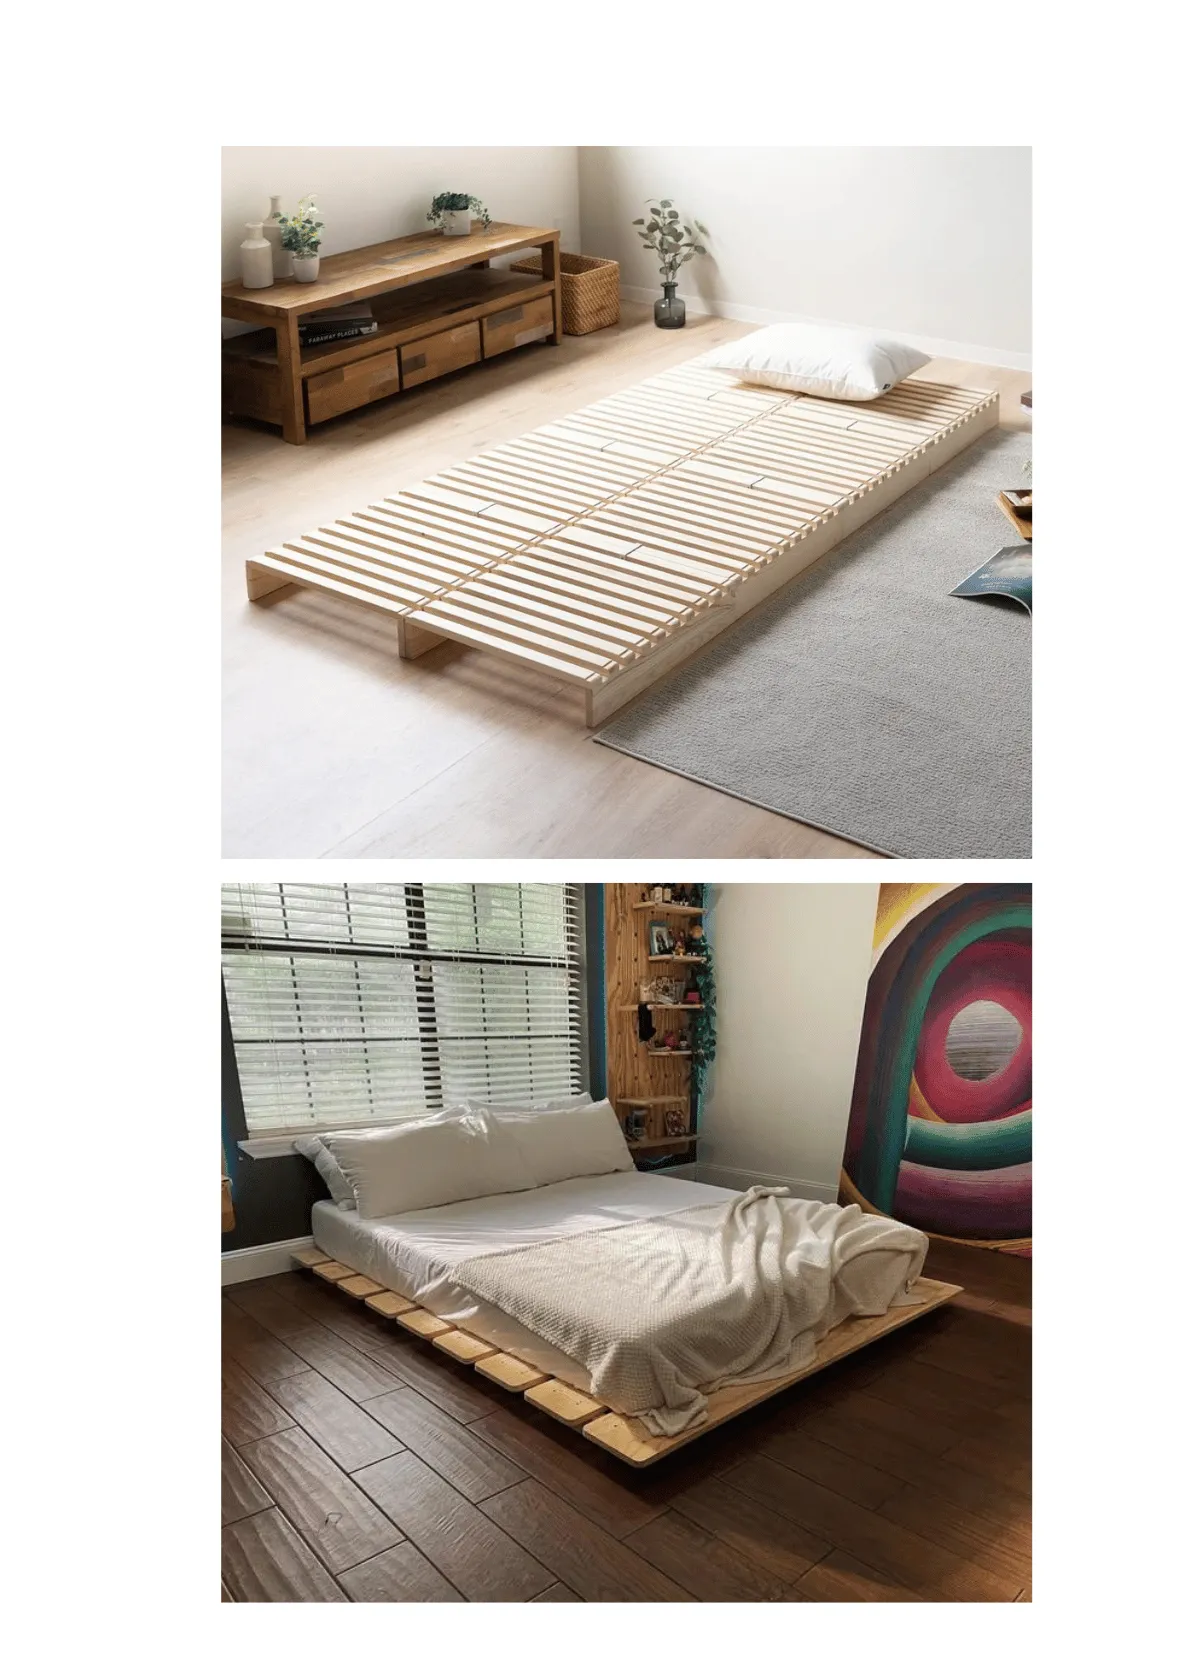 "Best Pallet Bed Frame Designs for Every Style: Tips & Tricks"